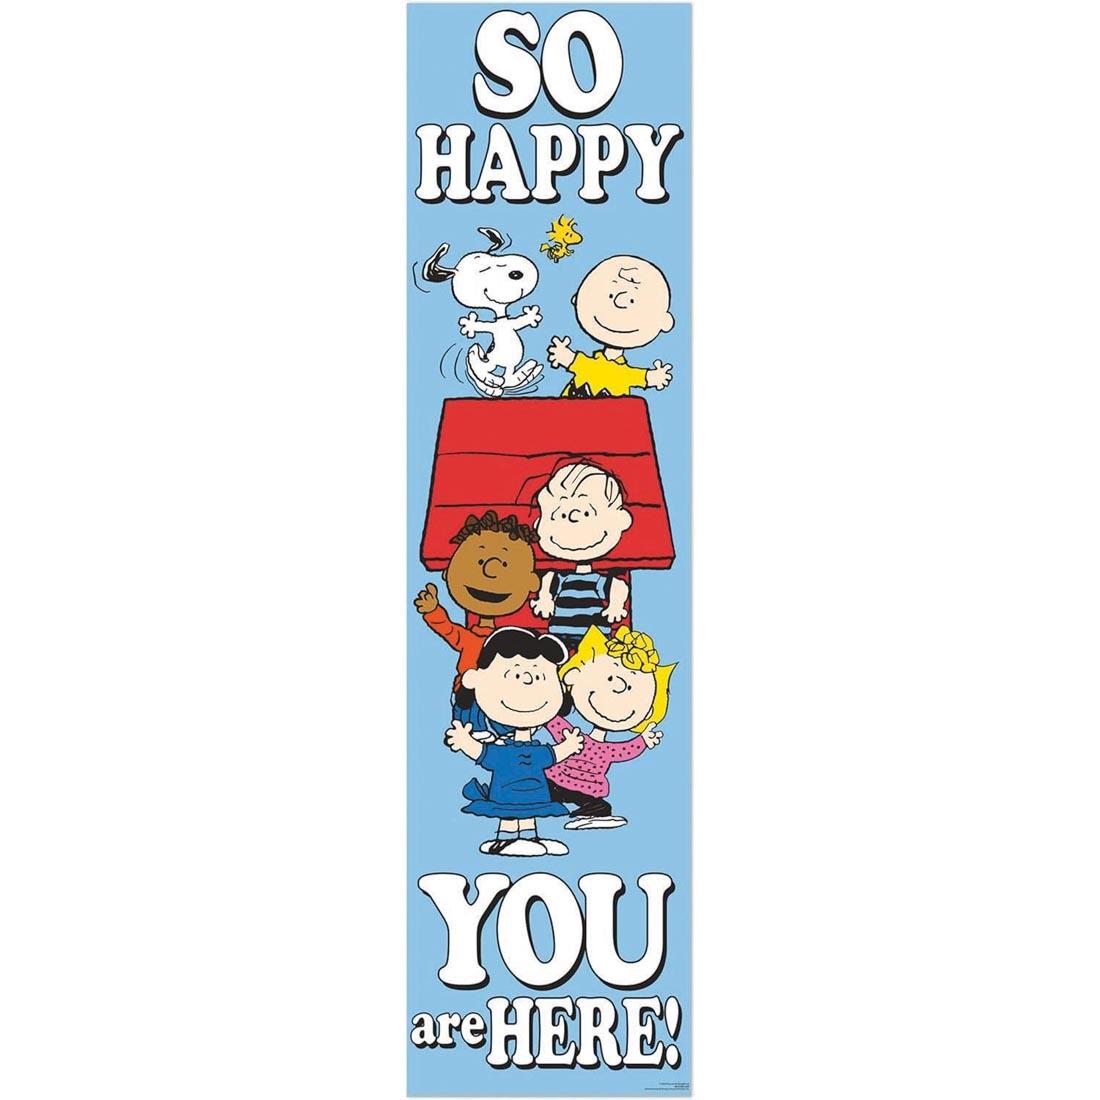 So Happy You are Here! Banner from the Peanuts collection by Eureka